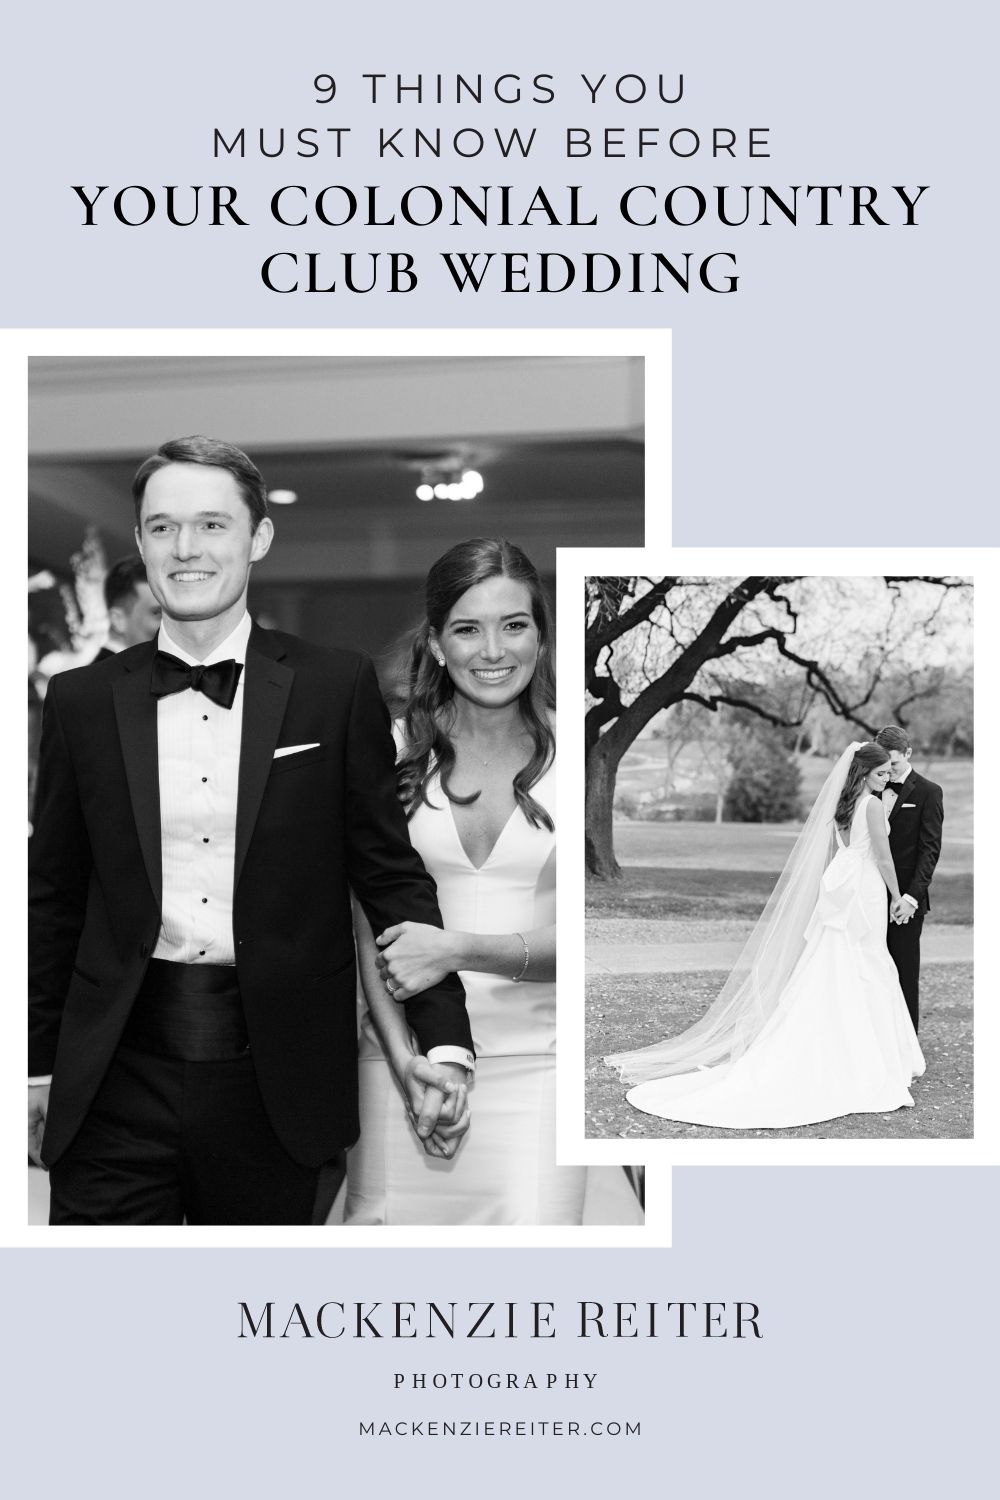 Collage of black and white photos of bride and groom during their country club wedding; image overlaid with text that reads 9 Things You Must Know Before Your Colonial Country Club Wedding